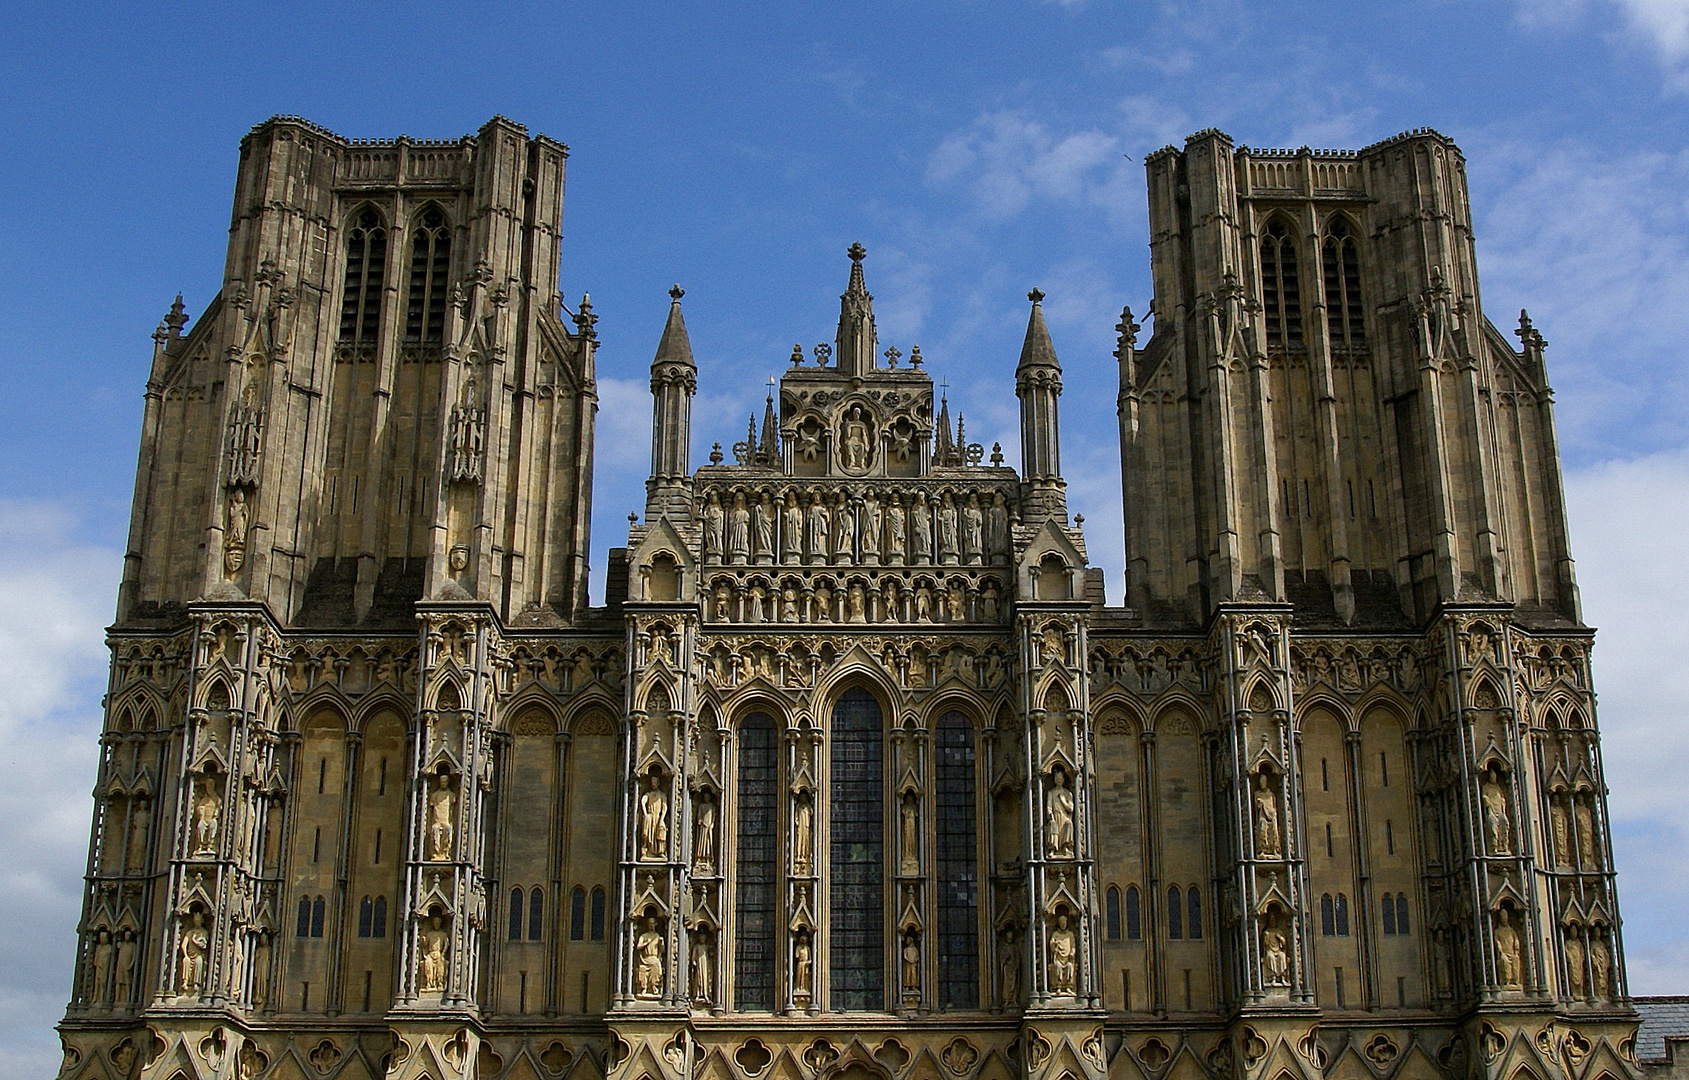 Wells - Cathedral